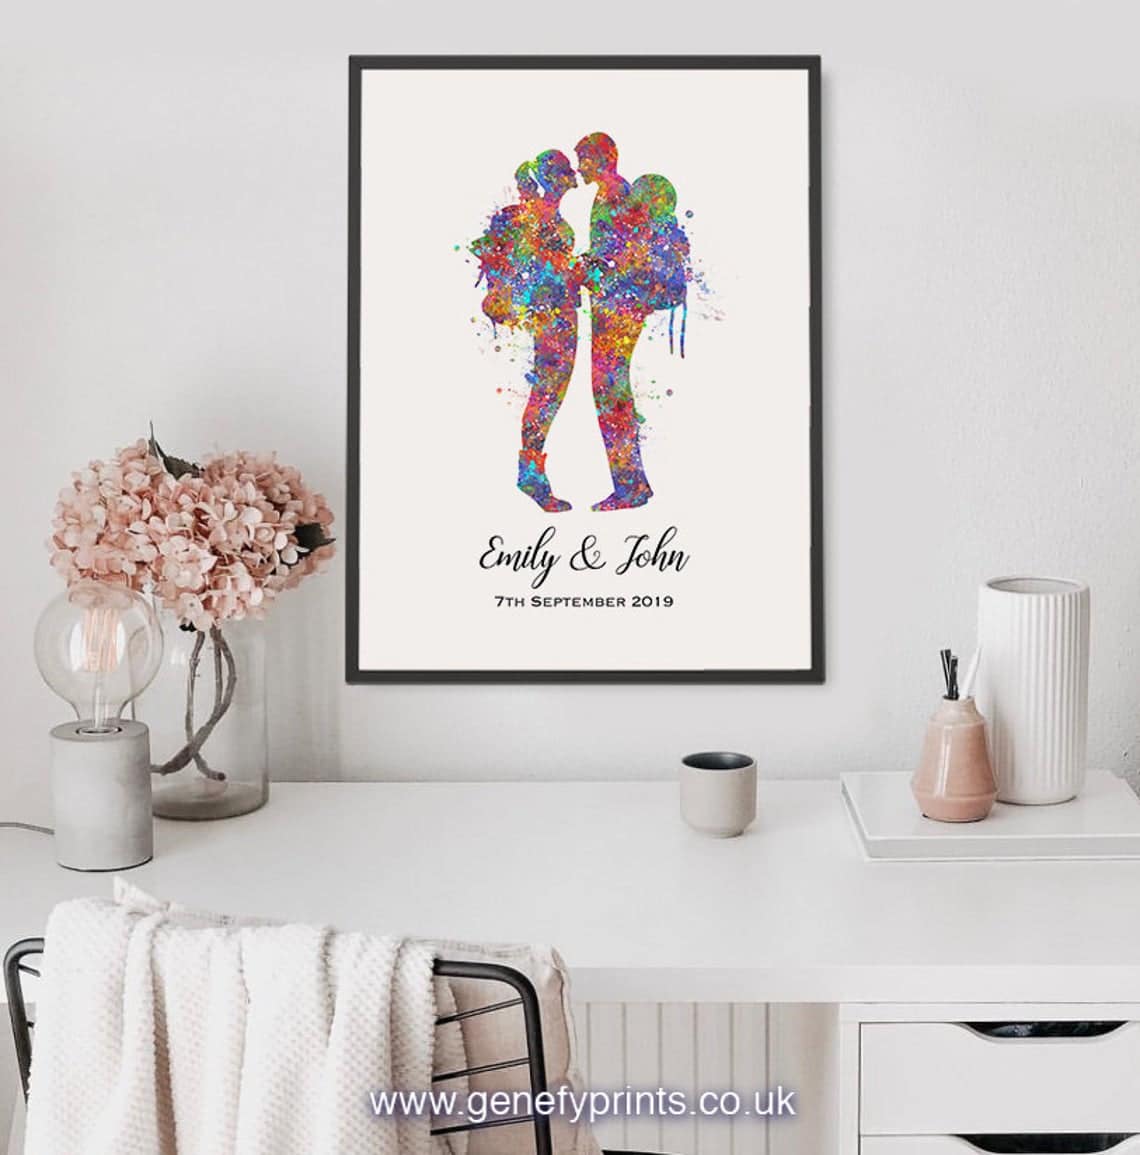 Personalized Watercolor Print for the Hiker Newlyweds